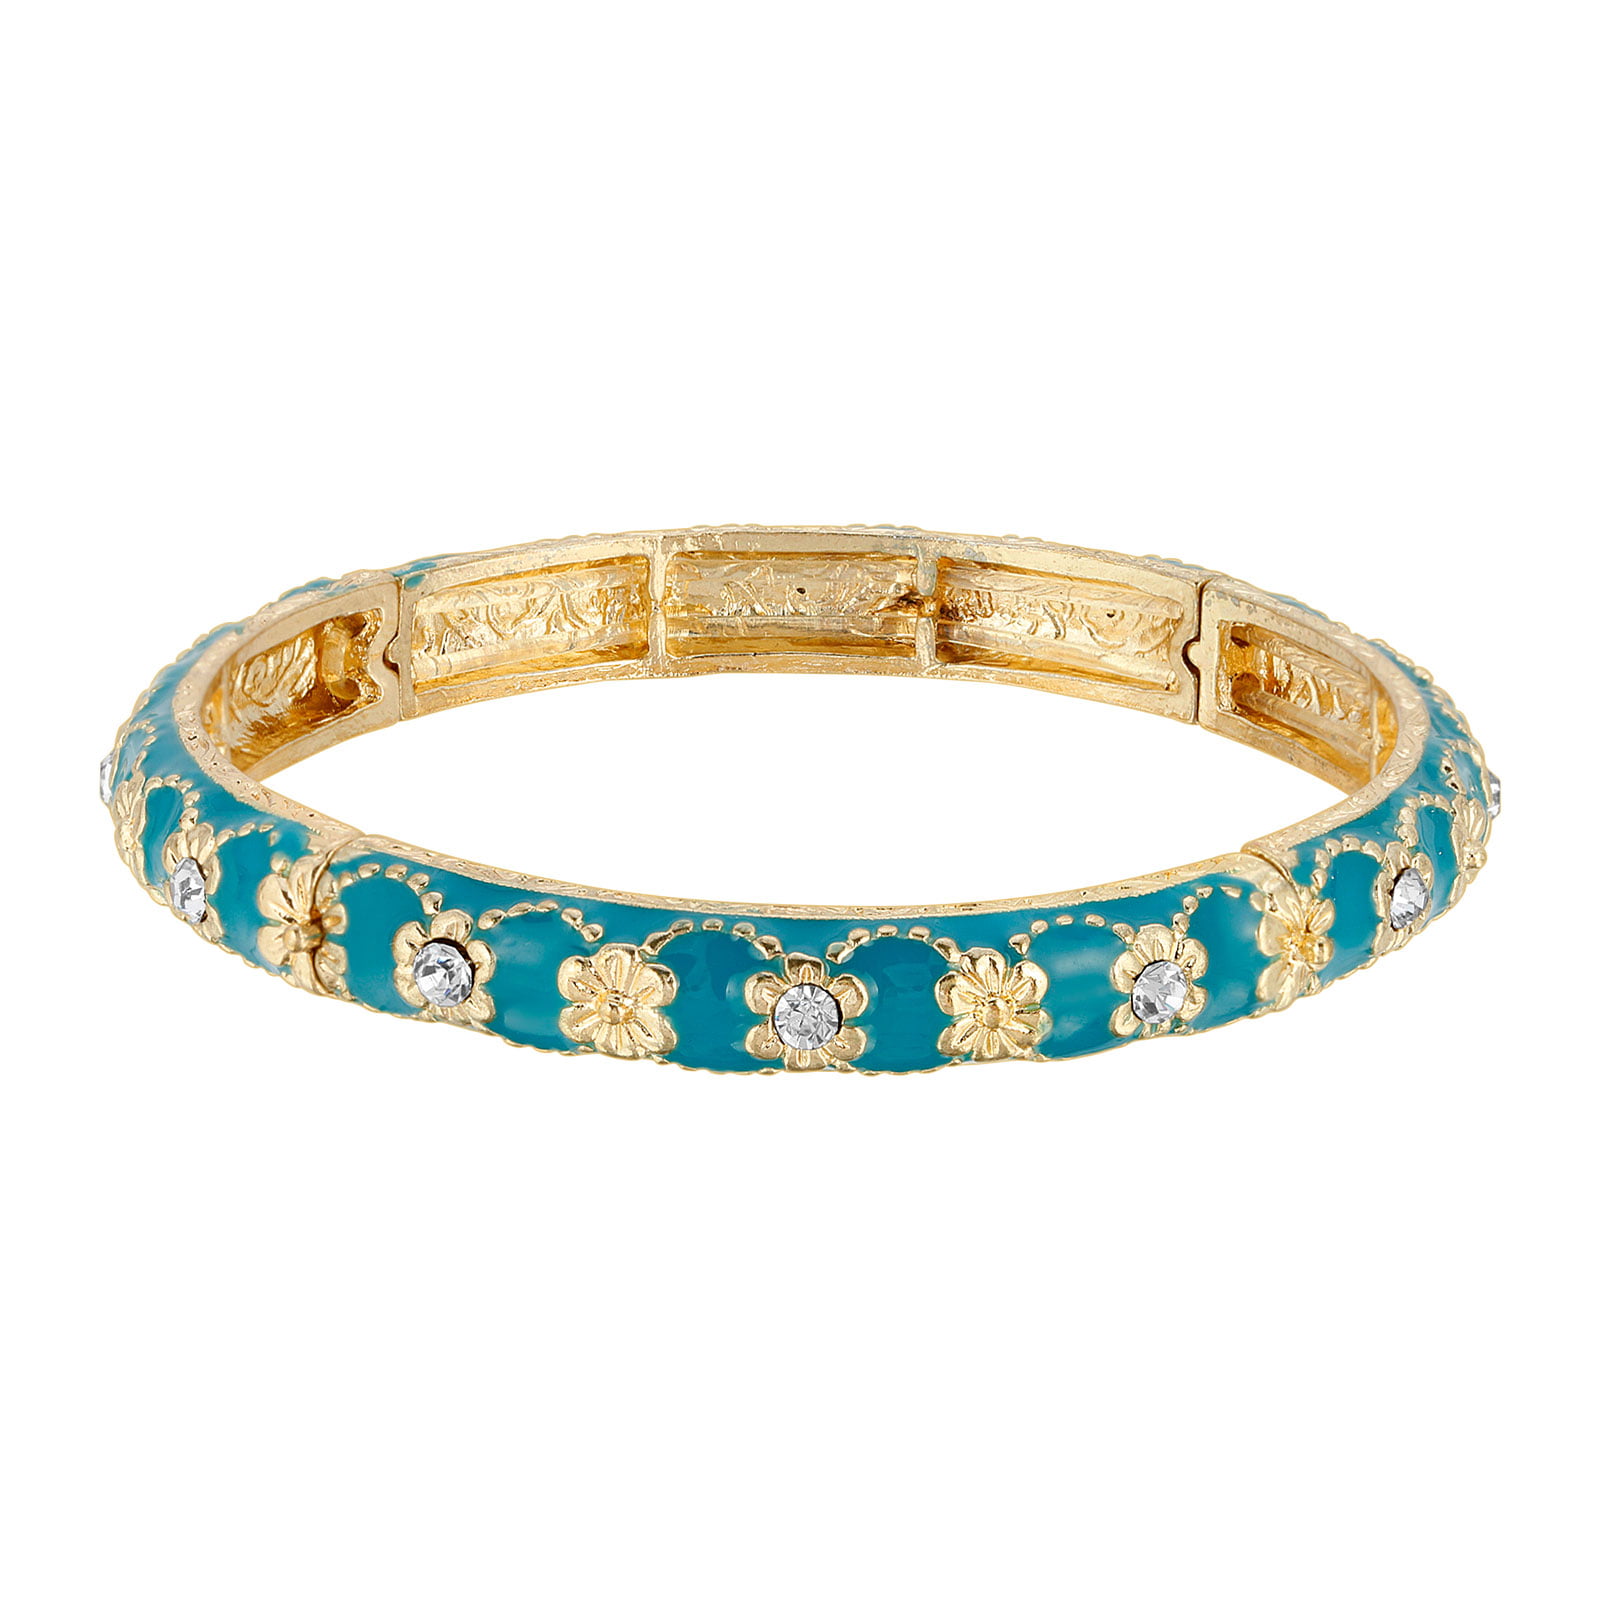 1928 Jewelry Gold-Tone Green and Blue Zircon Color Crystal Stretch Bracelet 